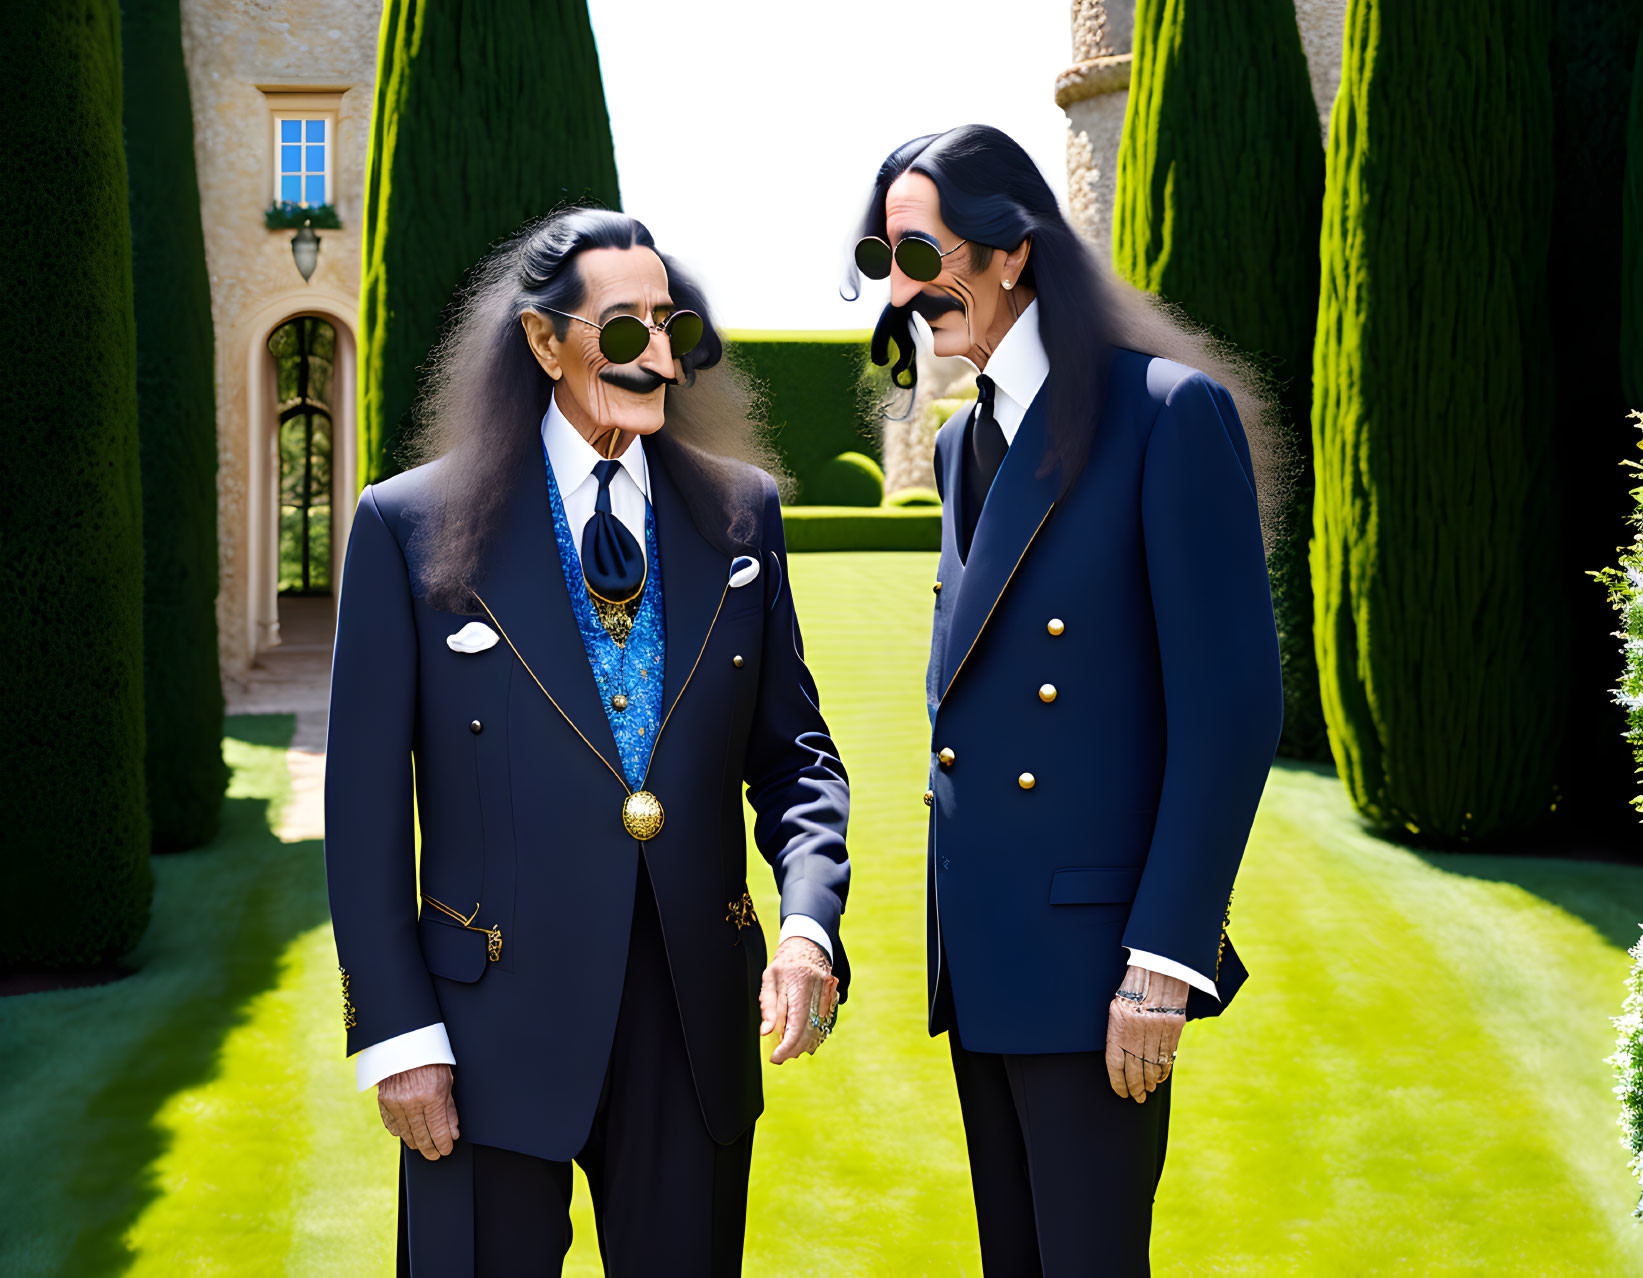 The Dali Brothers 3